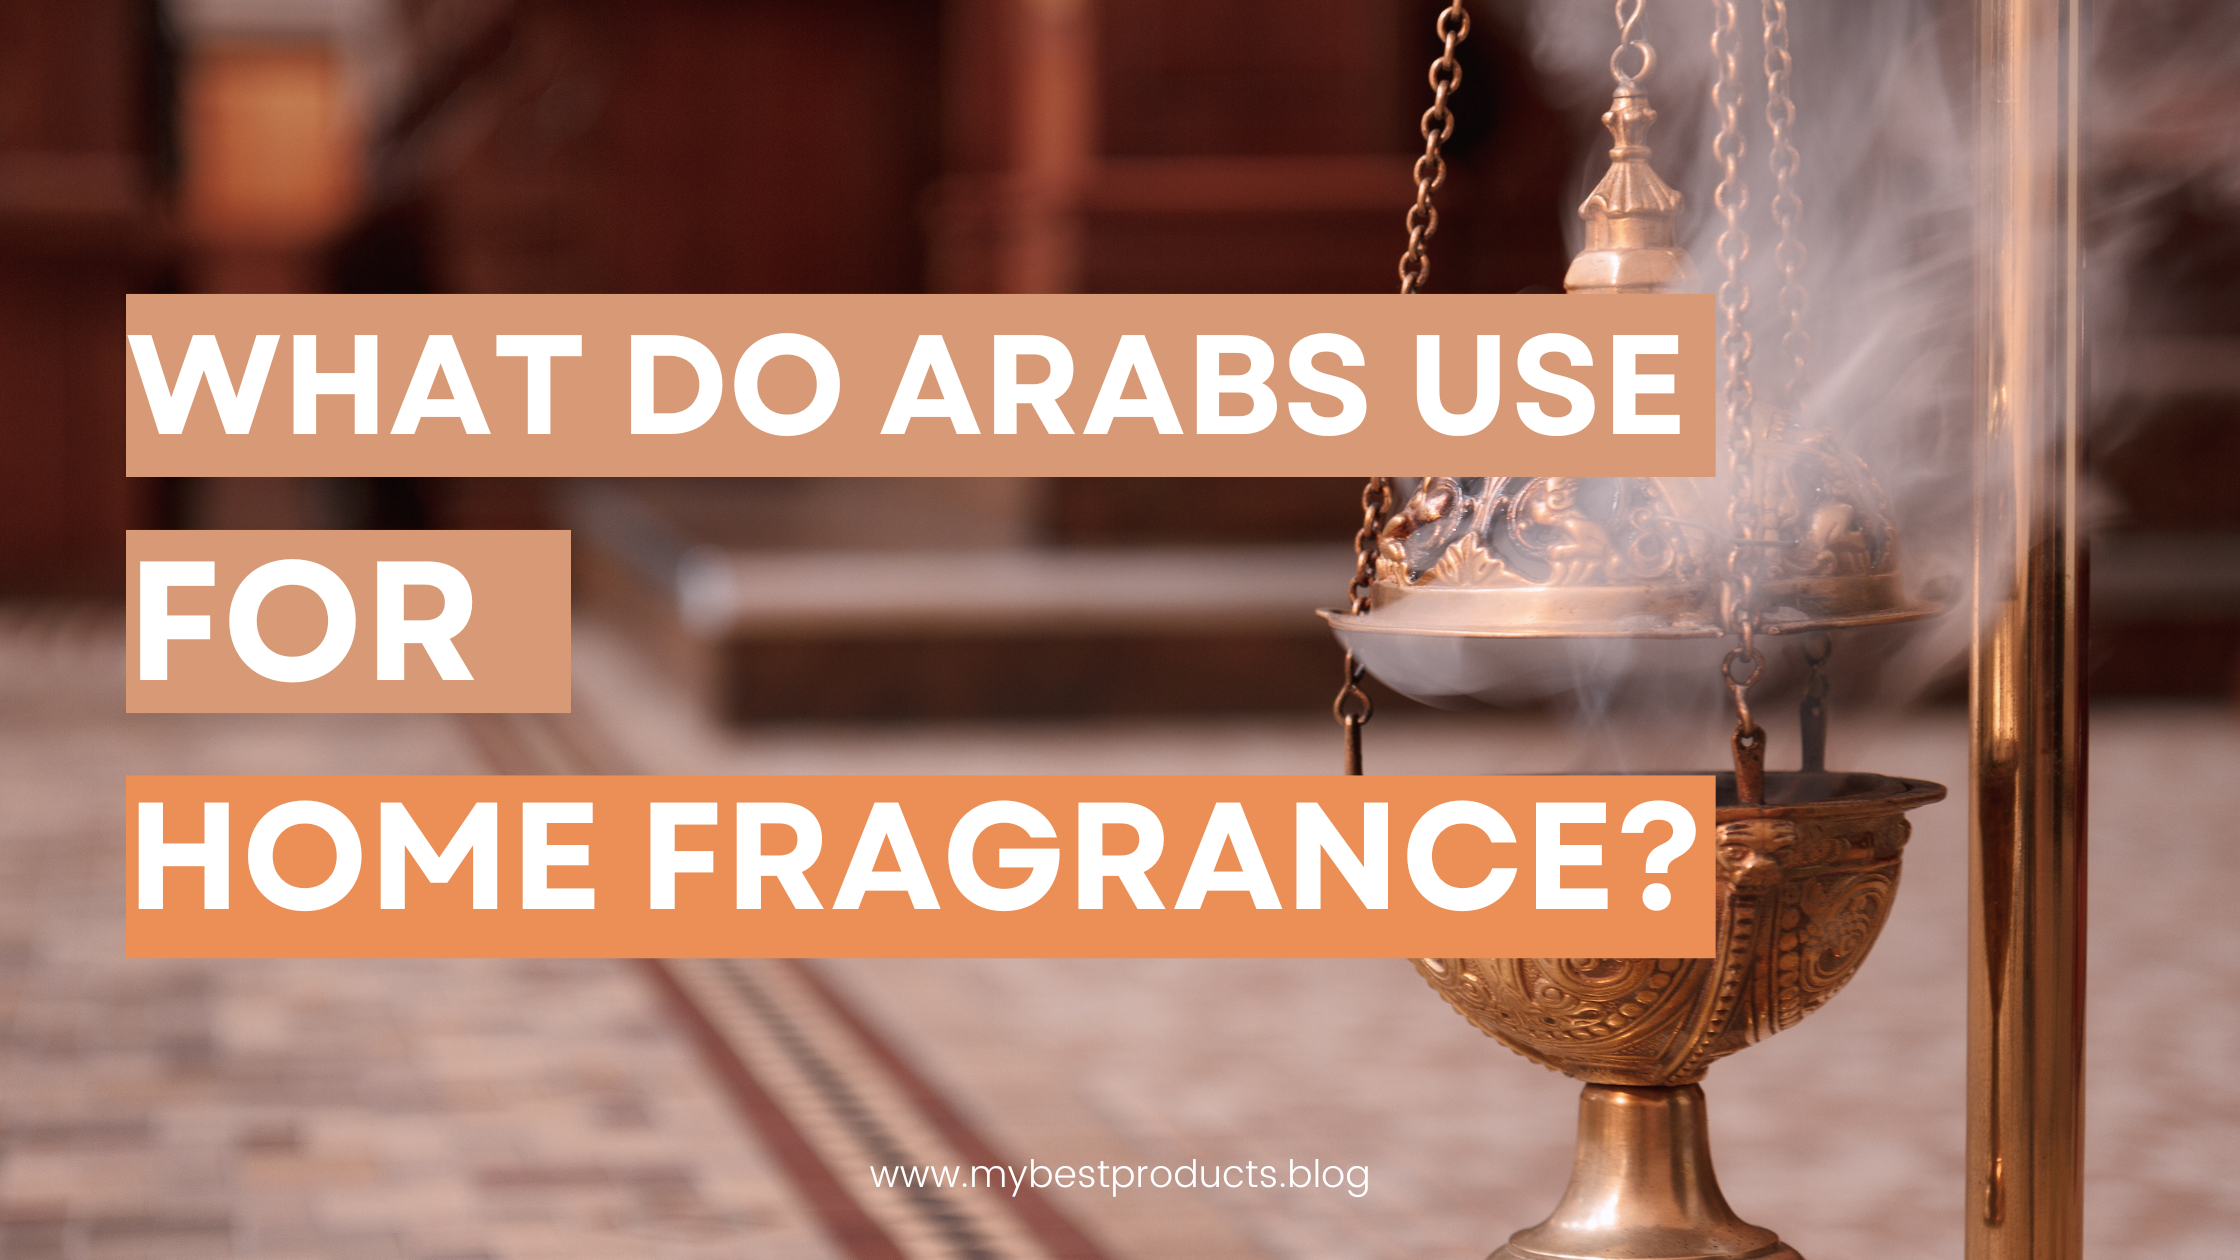 What do Arabs use for home fragrance?